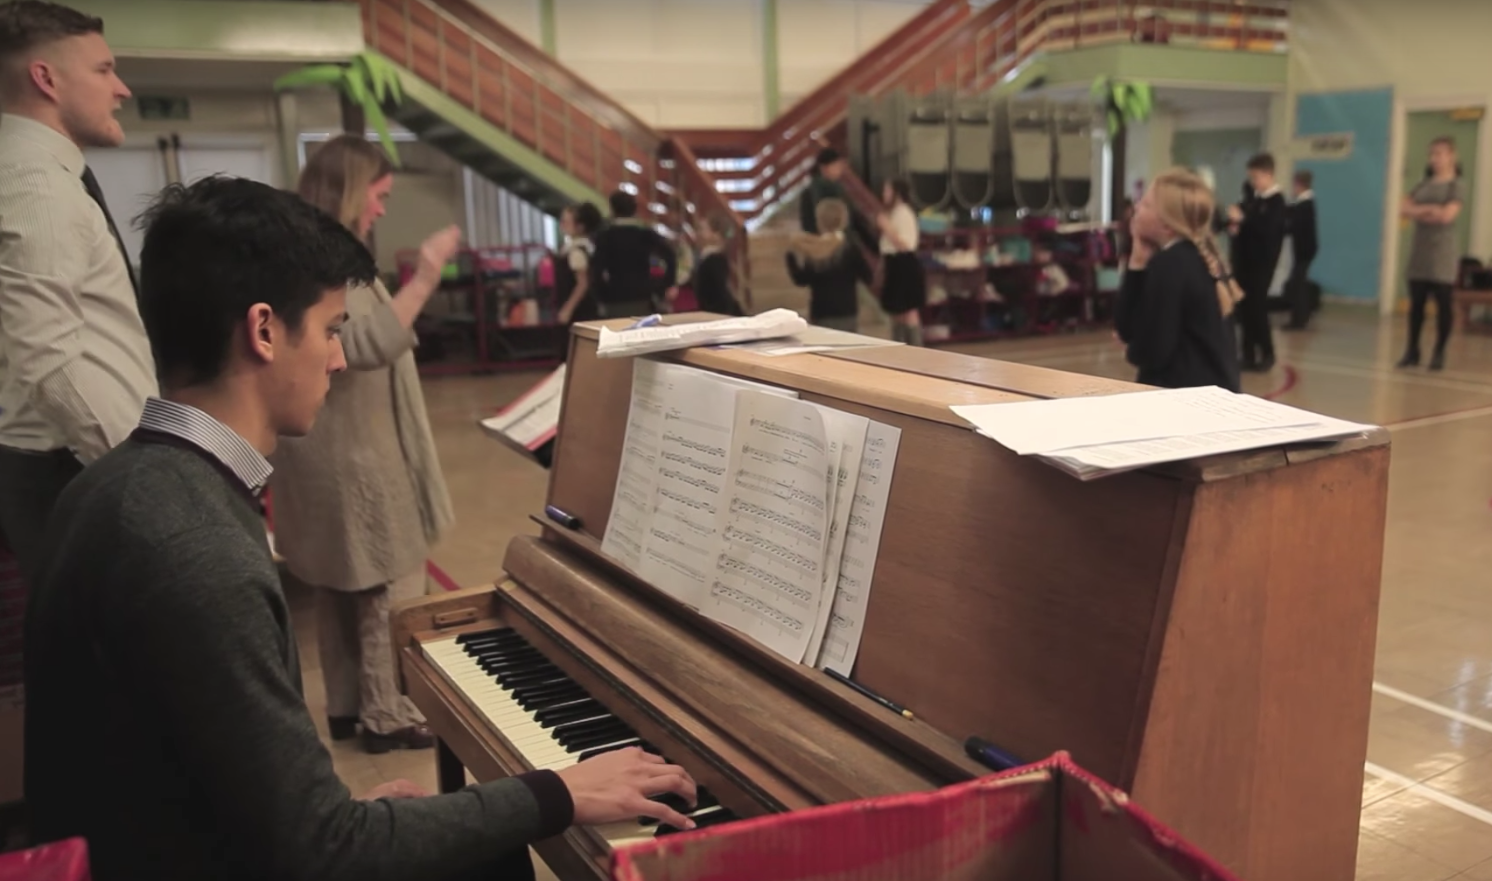 A pianist plays in a school hall.